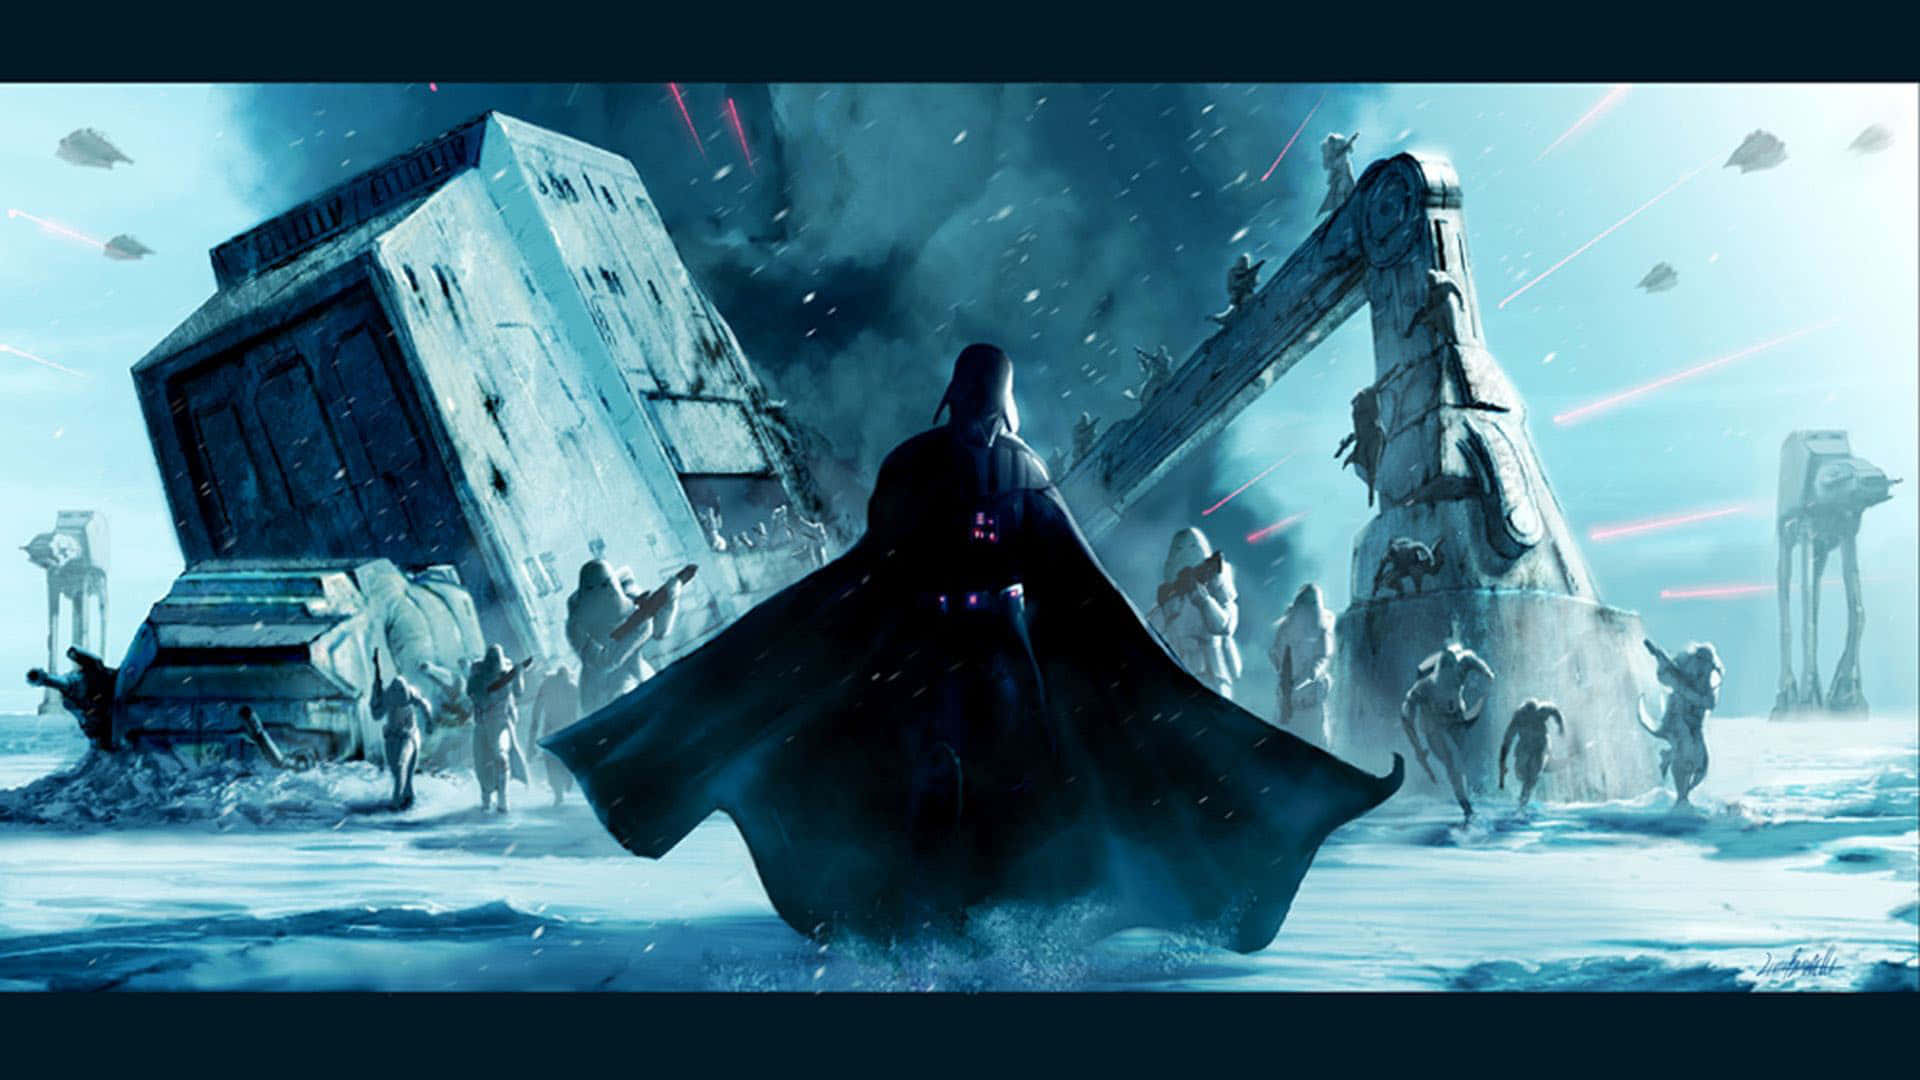 Image  Emperor Palpatine and Darth Vader Rule the Star Wars Empire Wallpaper